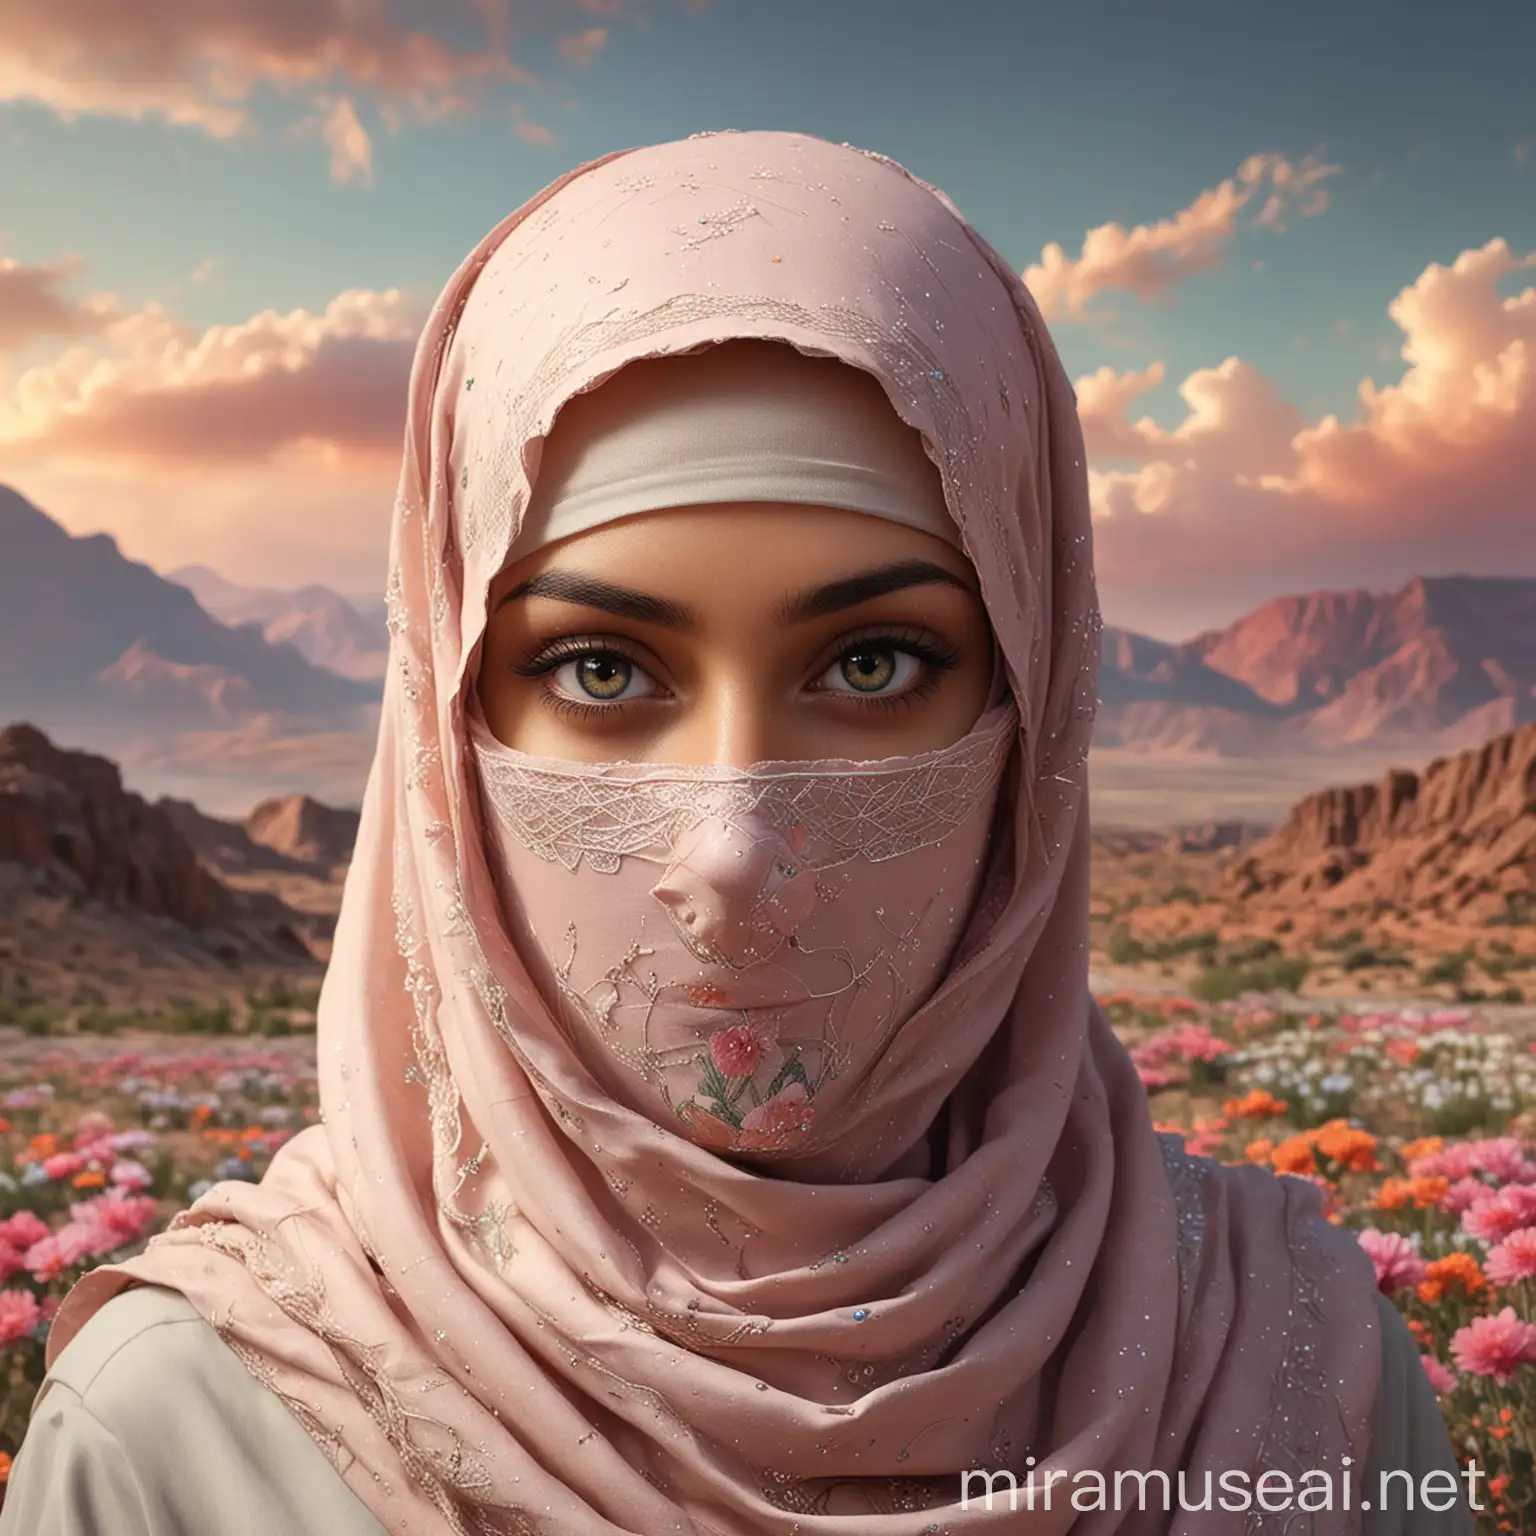 Create a hyper-realistic, 8K image of a woman wearing a hijab and niqab, ensuring only her eyes are visible. The image should capture intricate details, highlighting the texture and fabric of both the hijab and niqab. Focus on the natural expression in her eyes, conveying a sense of confidence and grace. The background should be softly blurred to emphasize the subject, with natural lighting enhancing the realism and depth of the image. with a seamless pattern on the background with featuring paper map from dark desert dirt mountains to sparkly bright heavenly pastel rainbow flower field with pastel fluffy clouds, in a harmonious artwork